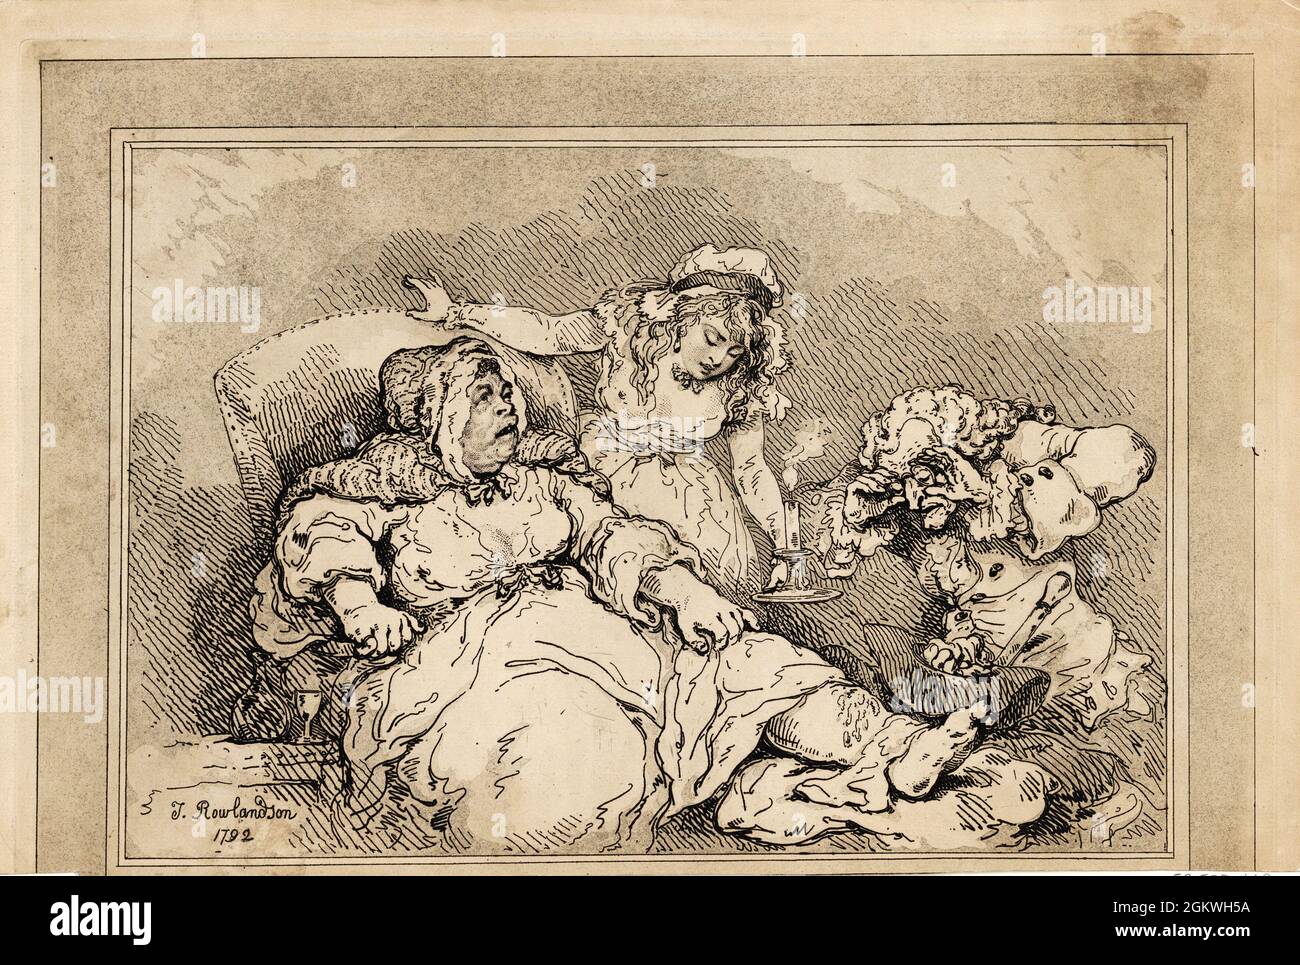 A Bawd on her last legs 1792 Artist: Thomas Rowlandson (1756-1827) an English artist and caricaturist of the Georgian Era. A social observer, he was a prolific artist and print maker.  Credit: Thomas Rowlandson/Alamy Stock Photo